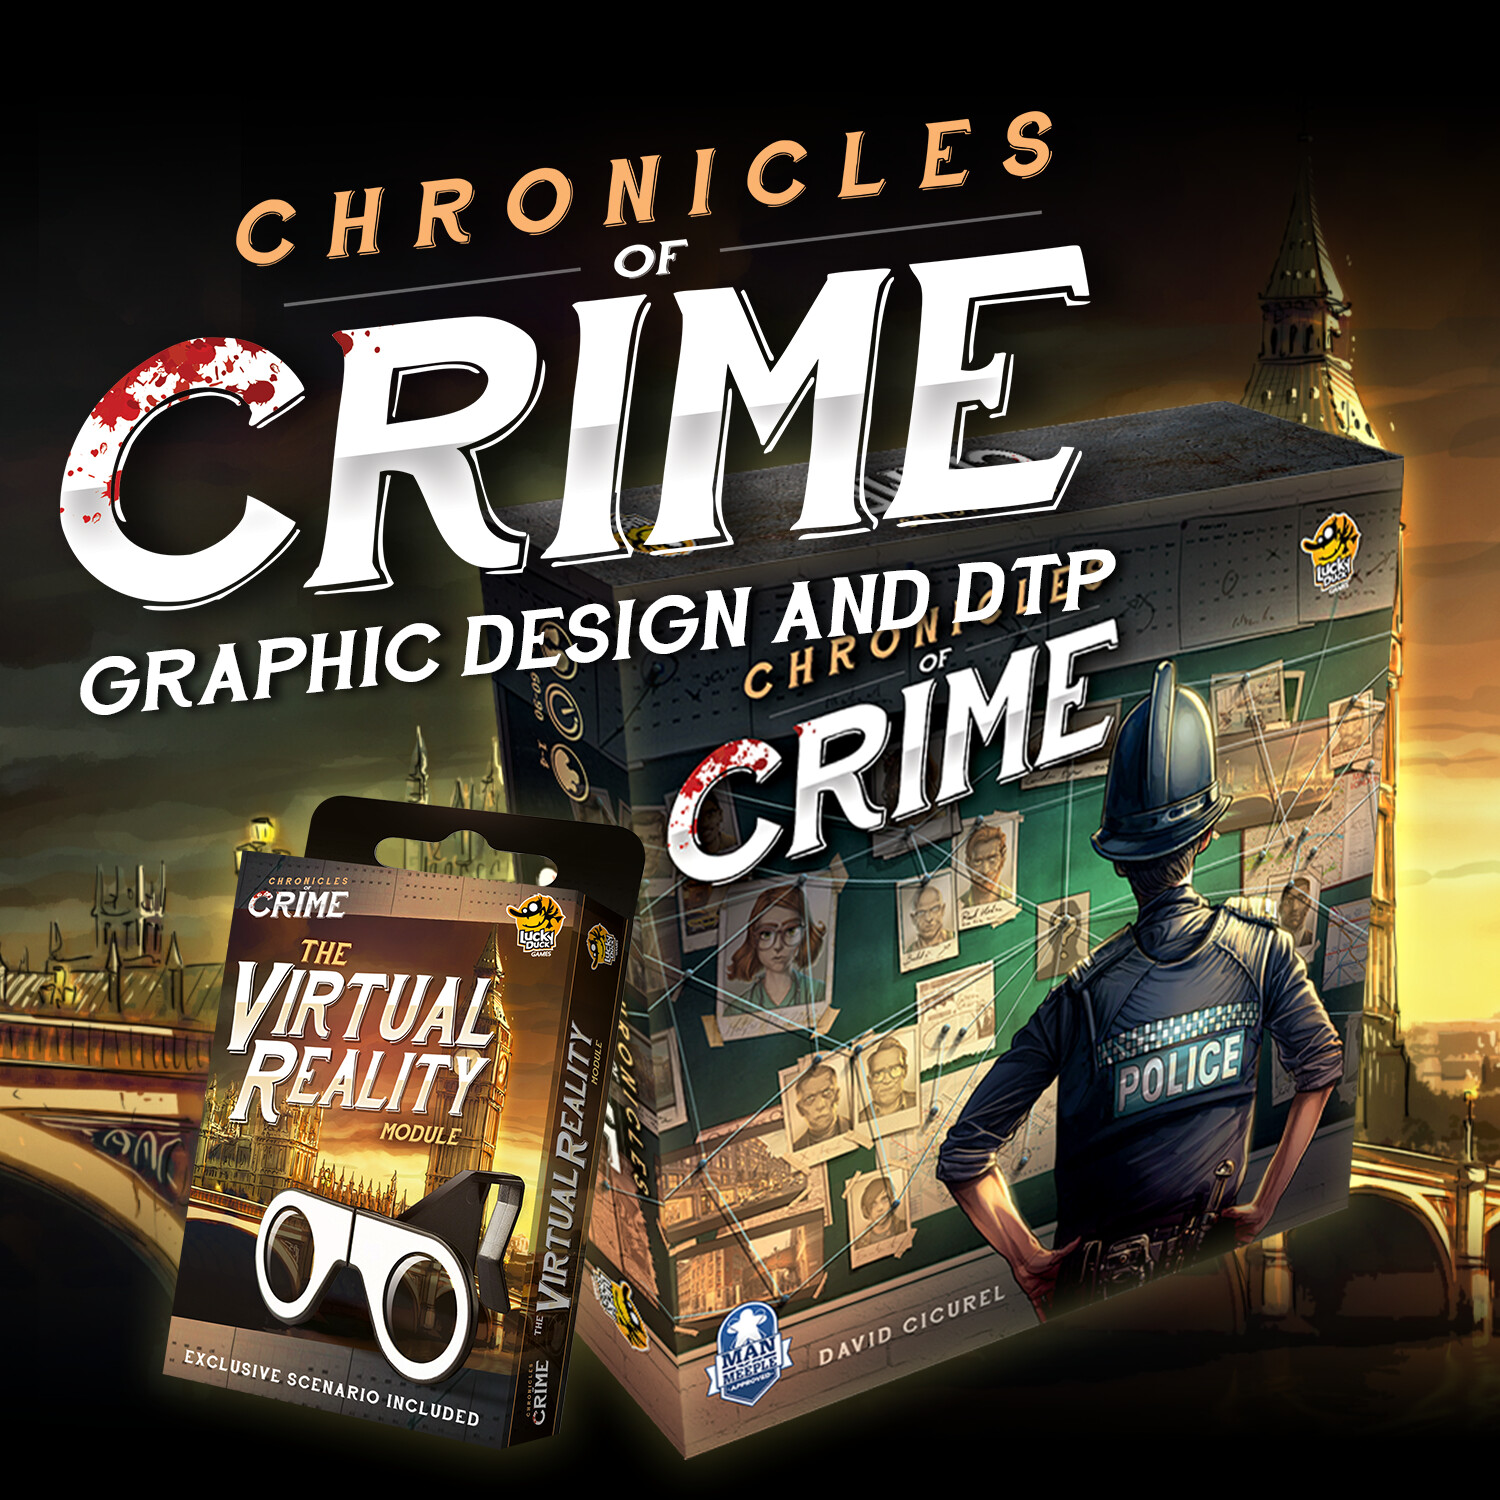 ArtStation - Graphic design and DTP for Chronicles of Crime